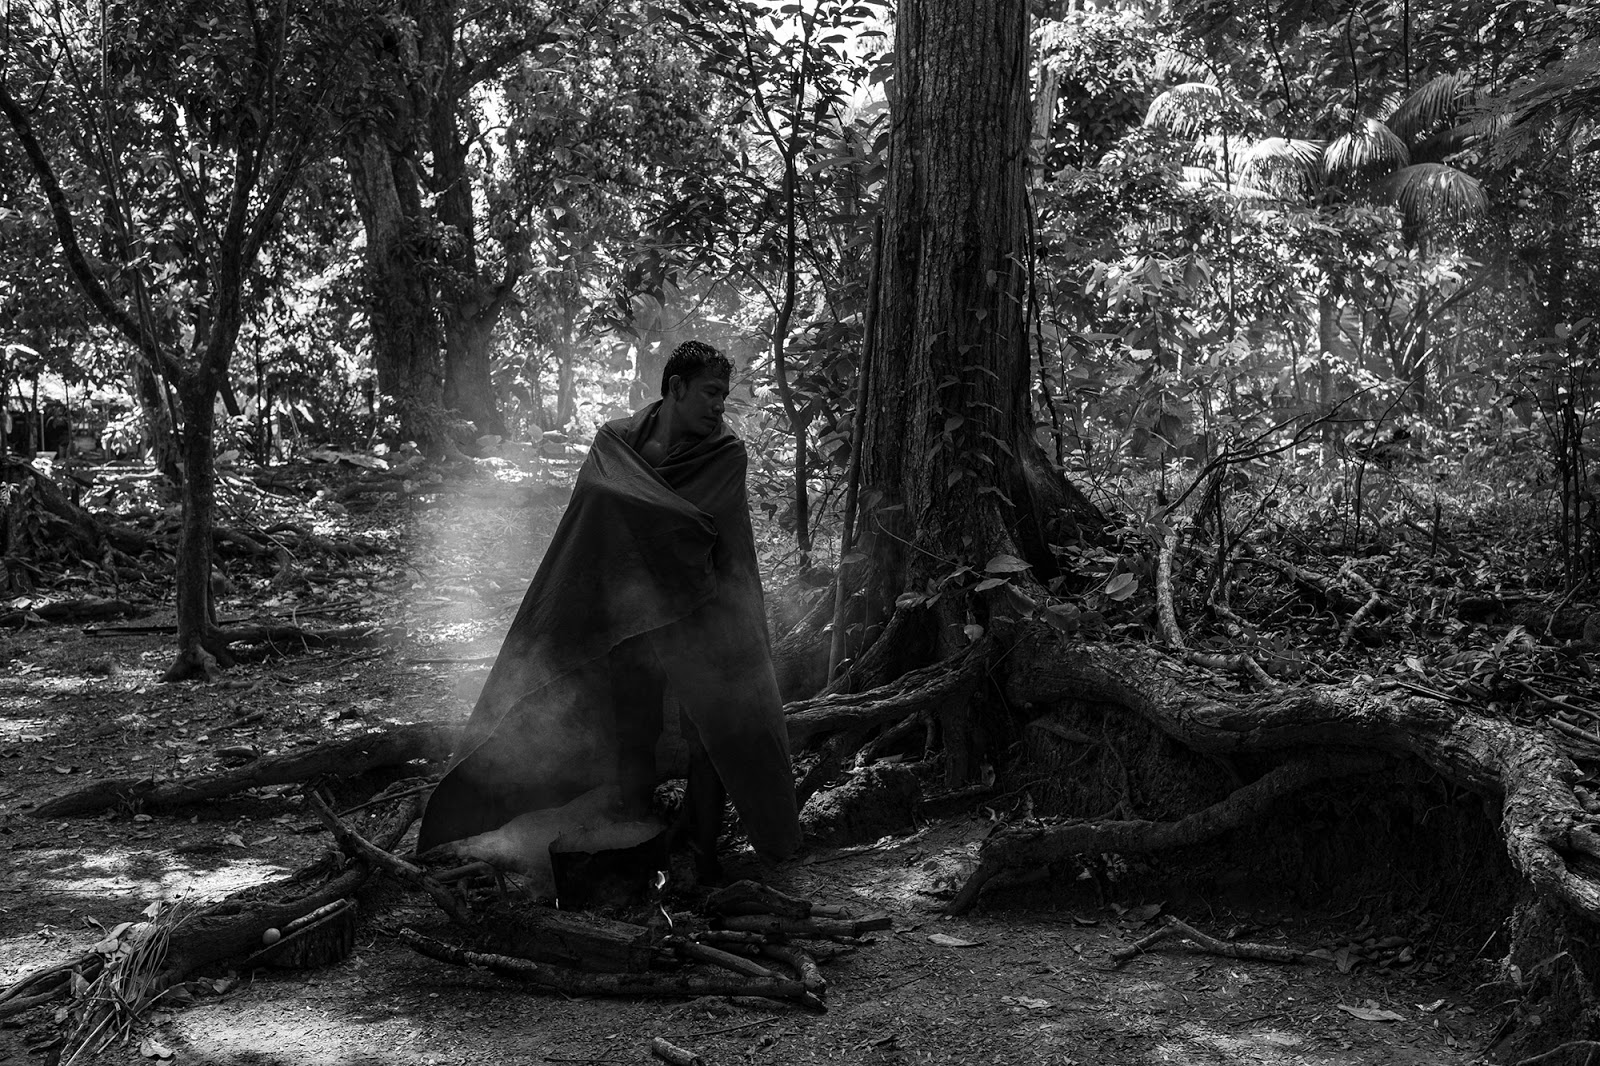 A man wearing a cape and standing in the middle of vapors in the forest.